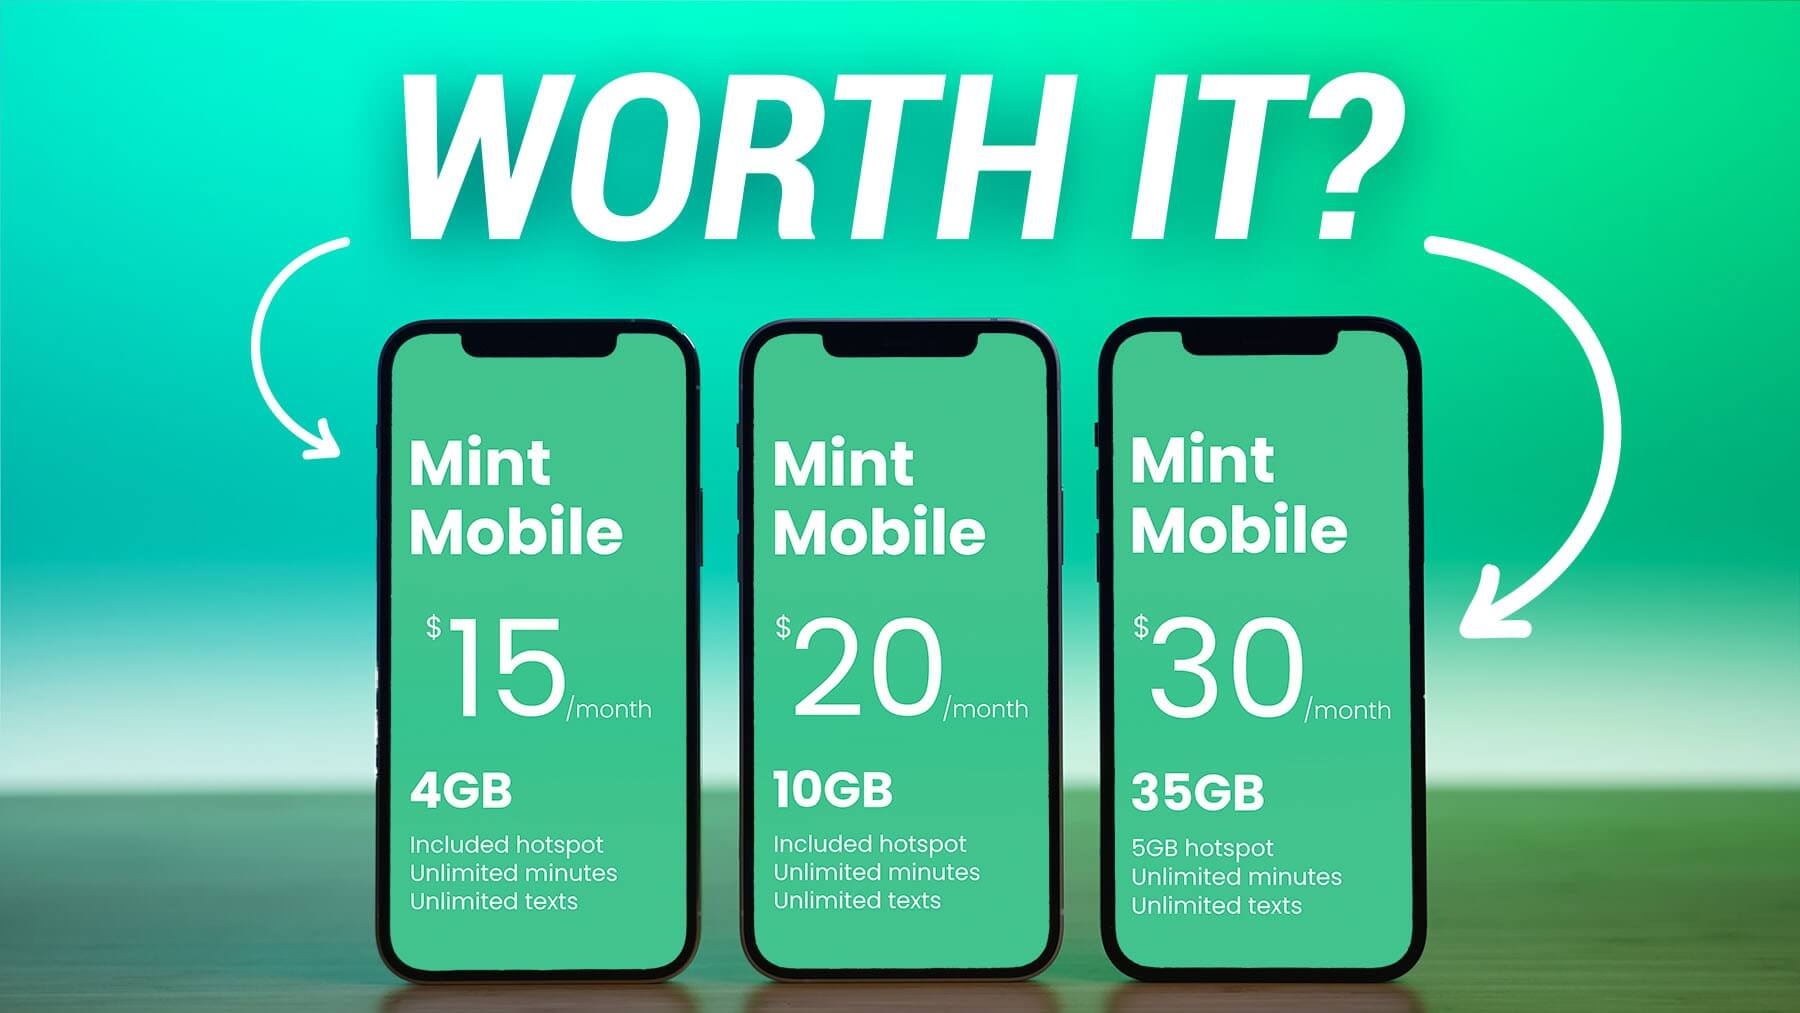 Discover the Flexibility and Innovation of Mint Mobile's Services